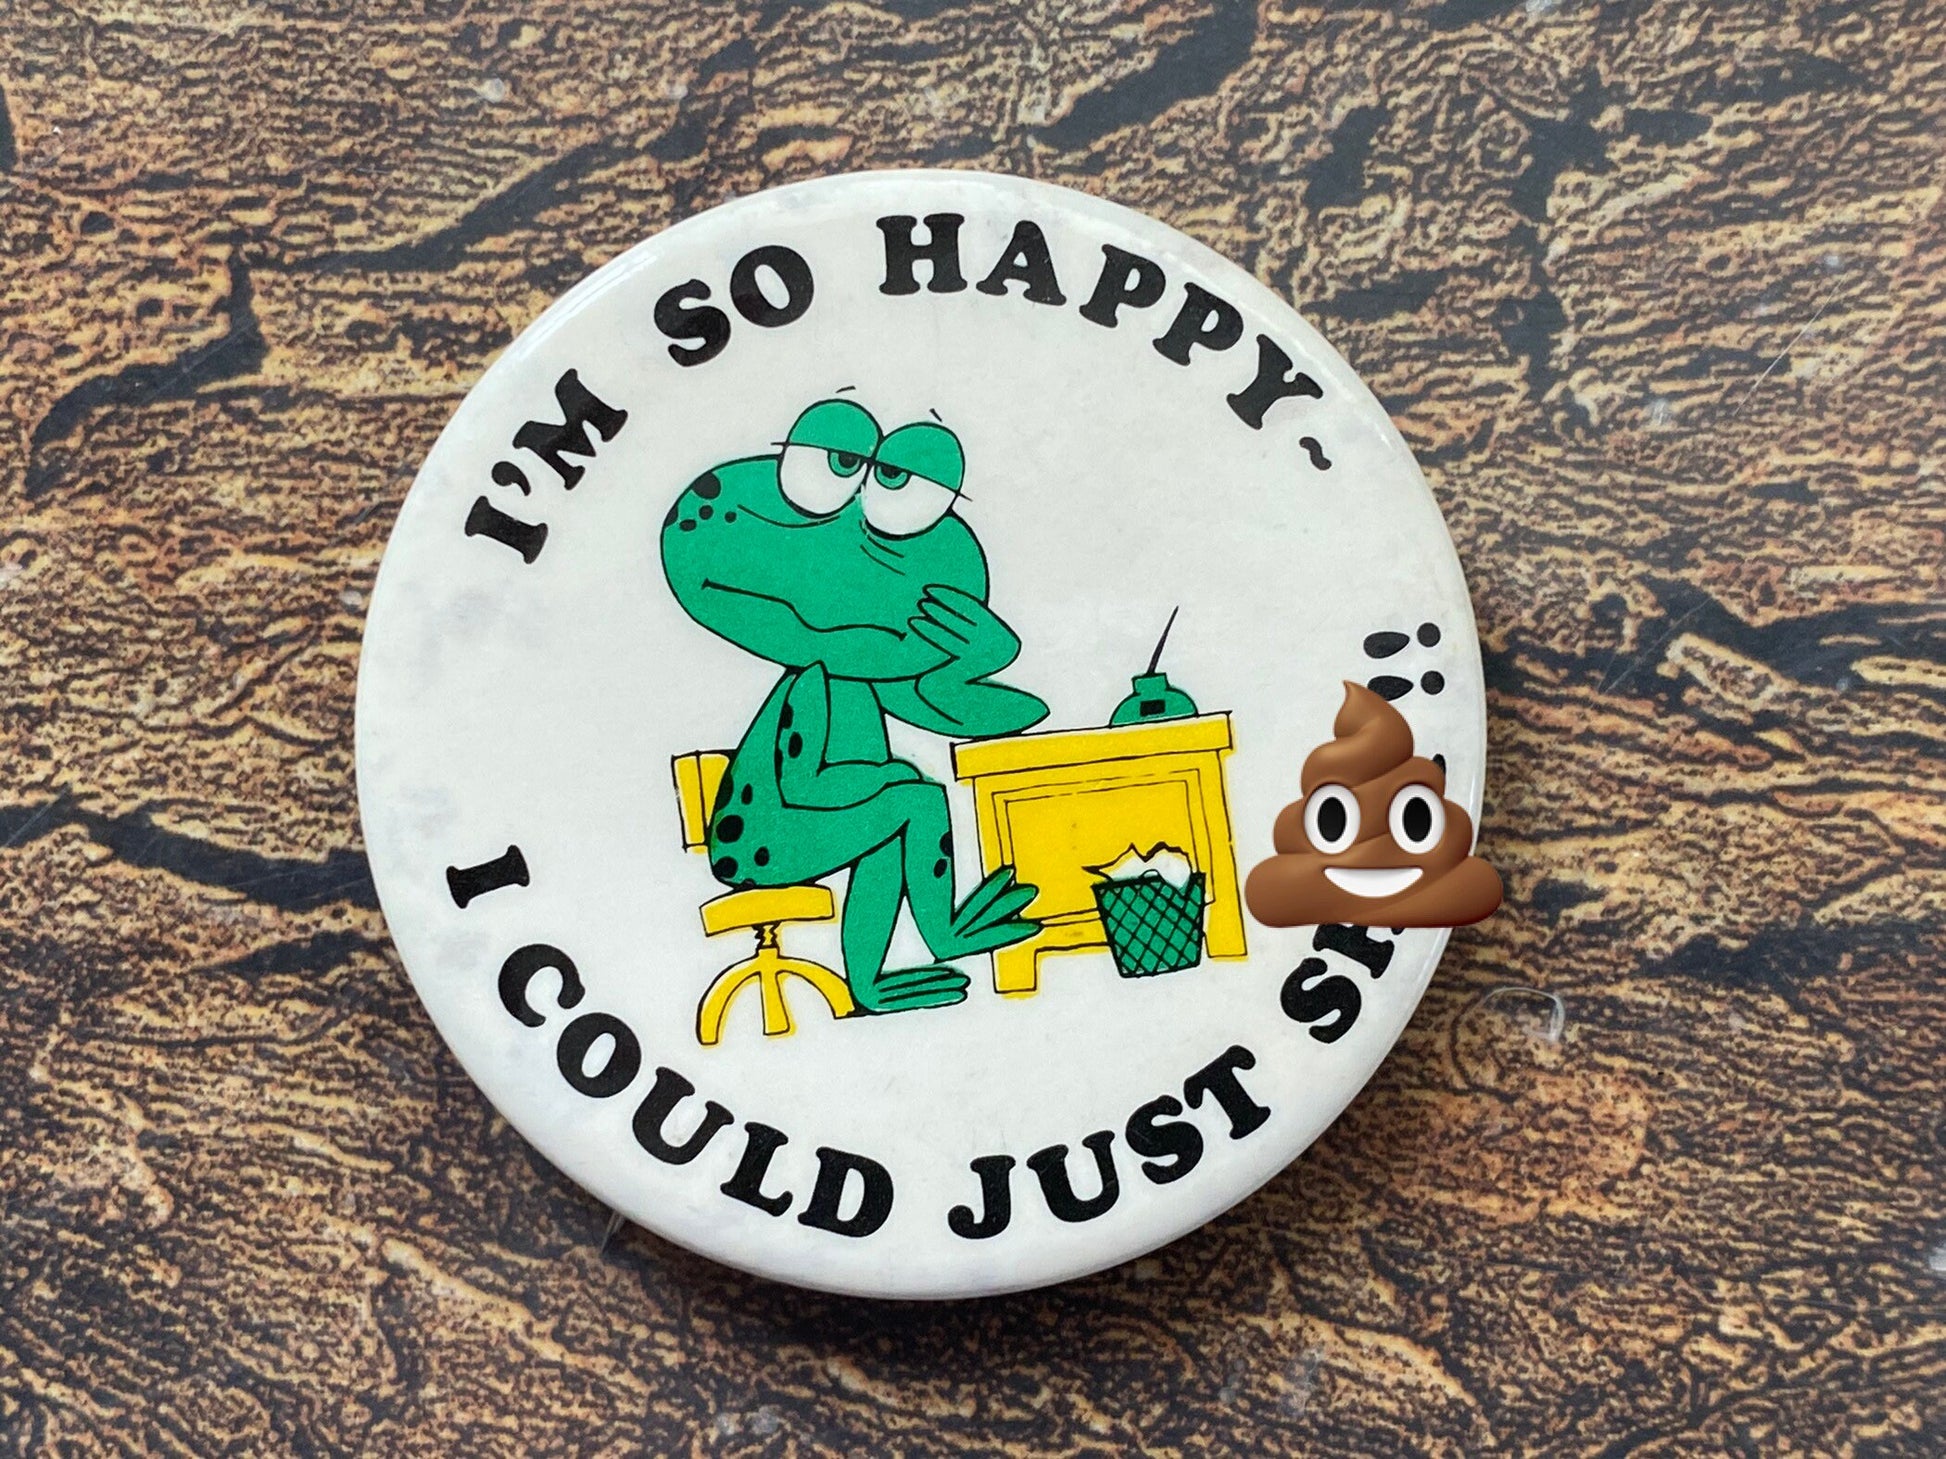 Vintage I'm So Happy I Could Just Shit!! pinback button. Retro funny snarky pins. Sarcastic frog button. MATURE